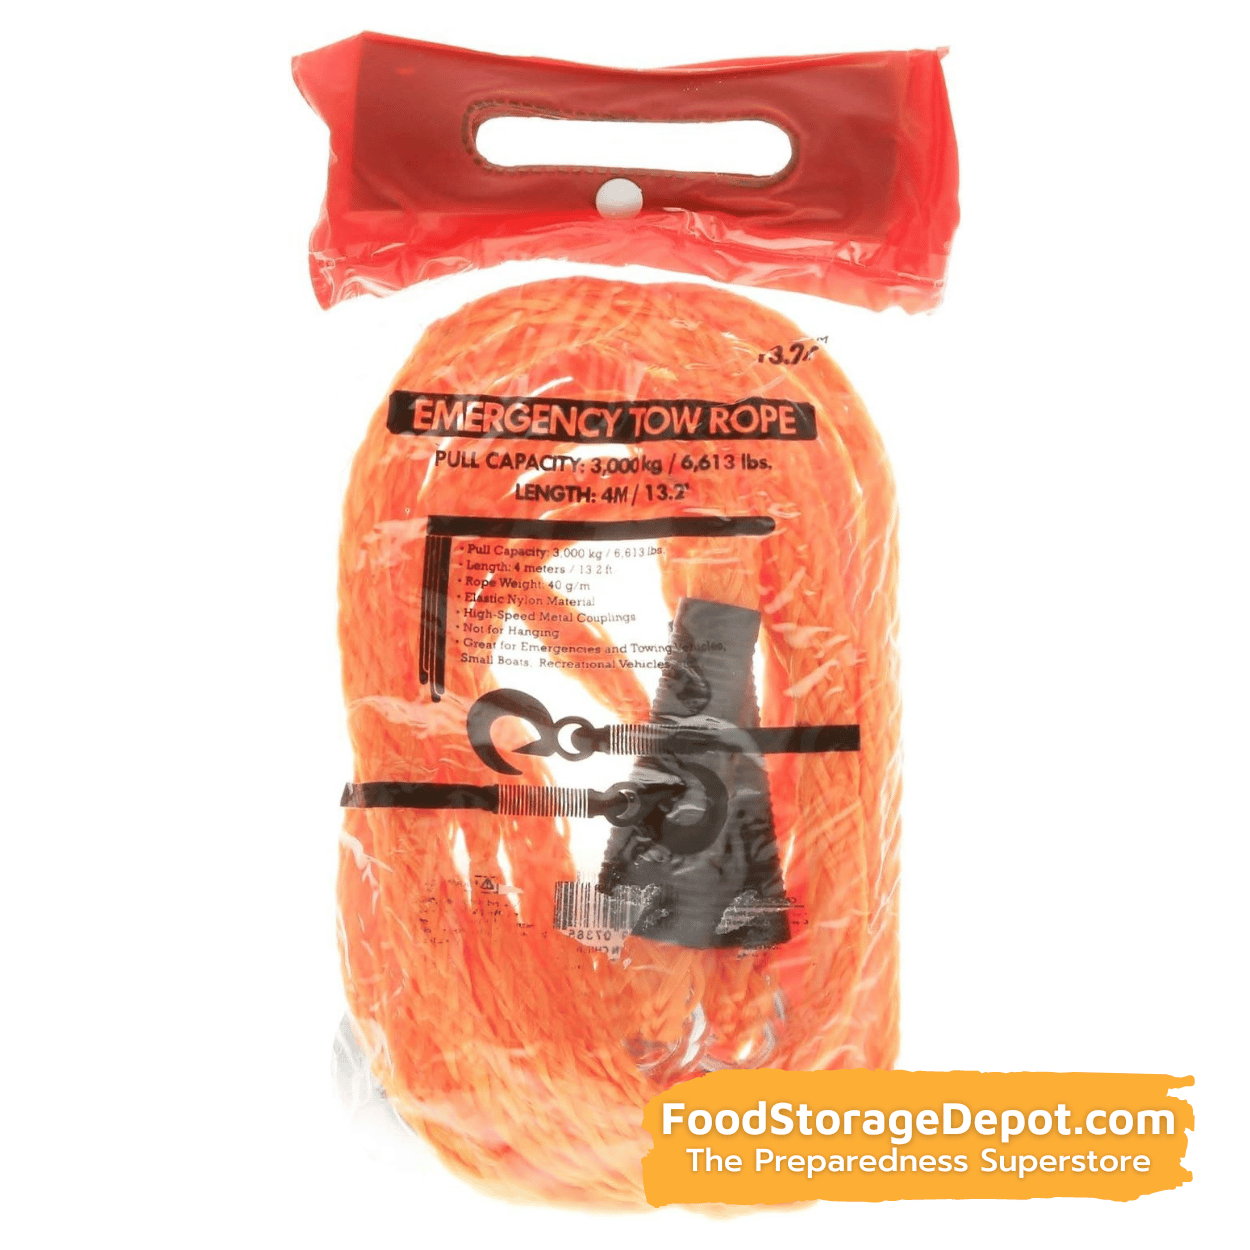 Emergency Tow Rope - 13.2ft Long (Pull Capacity 1760 Lbs)